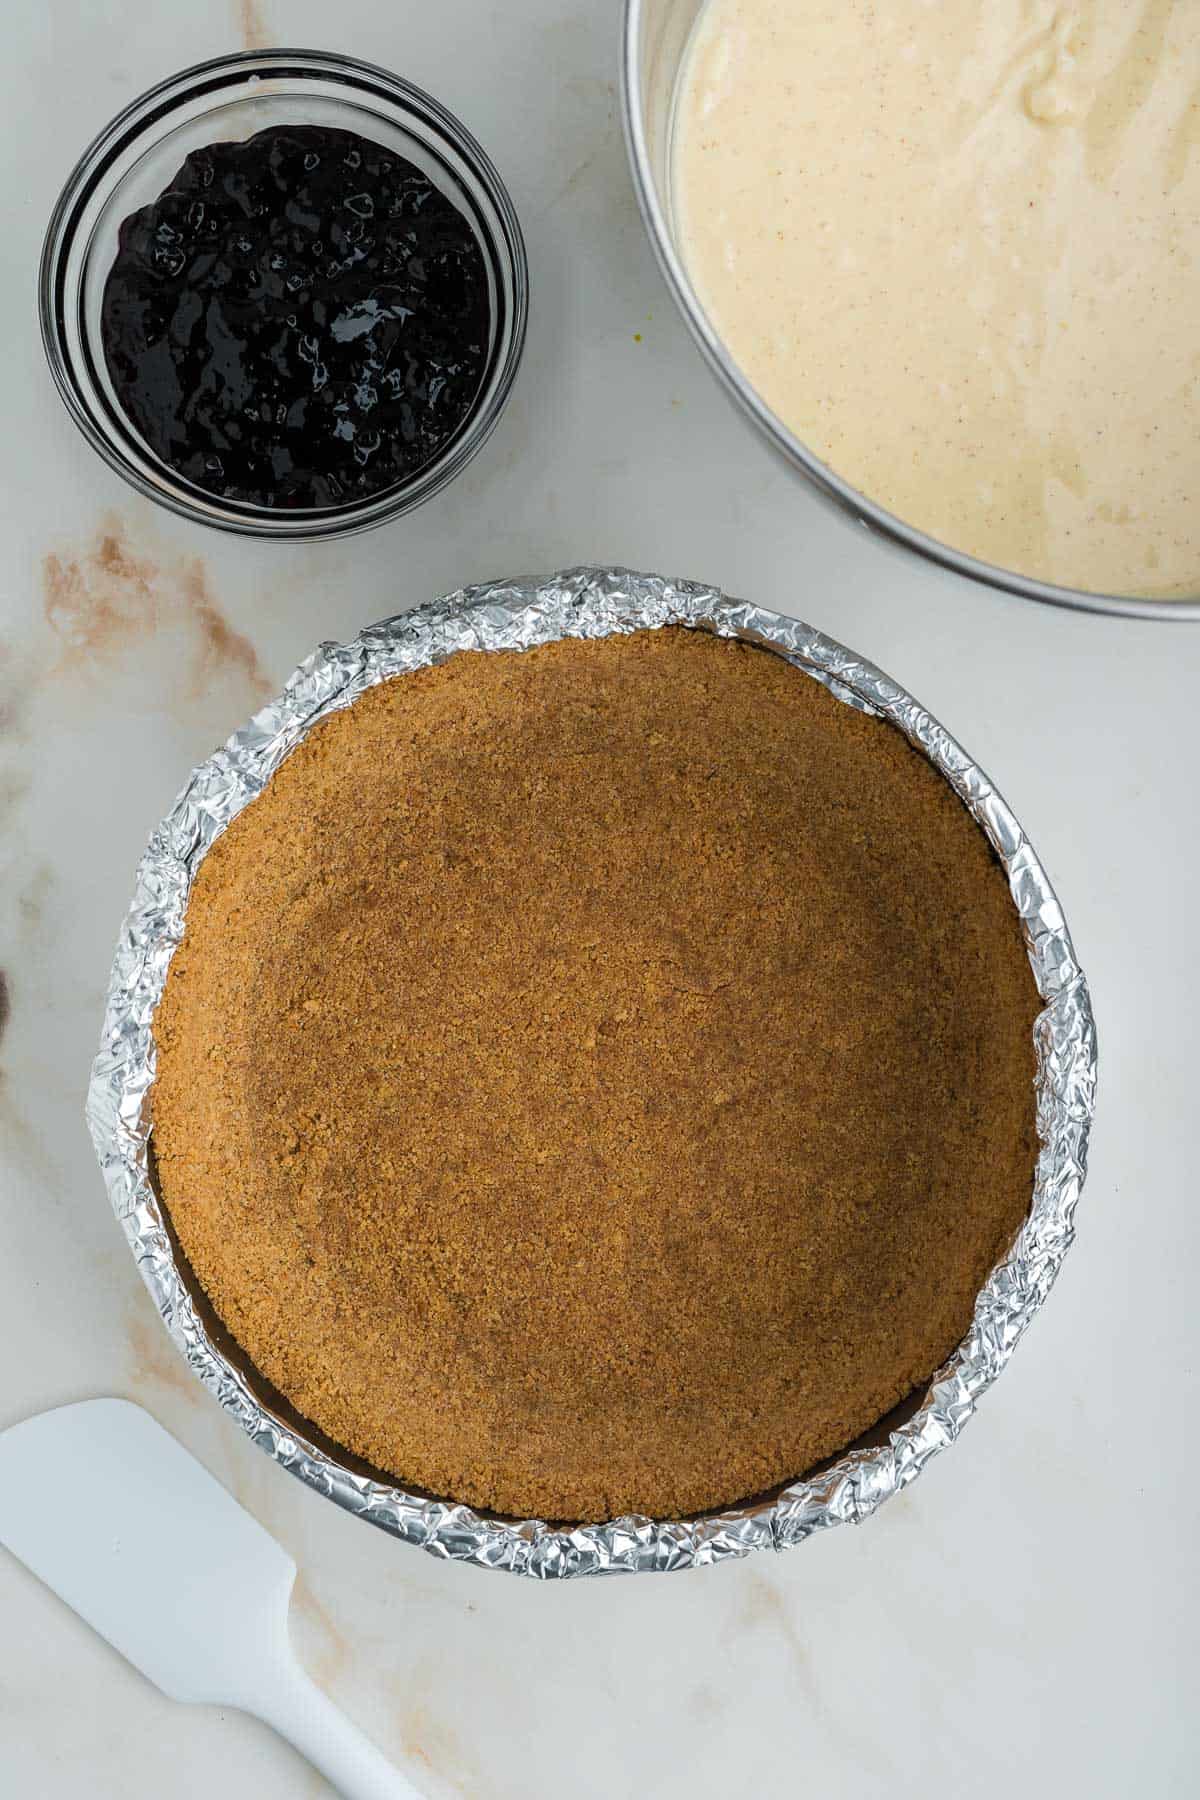 Graham cracker crust for cheesecake pressed into a springform pan.